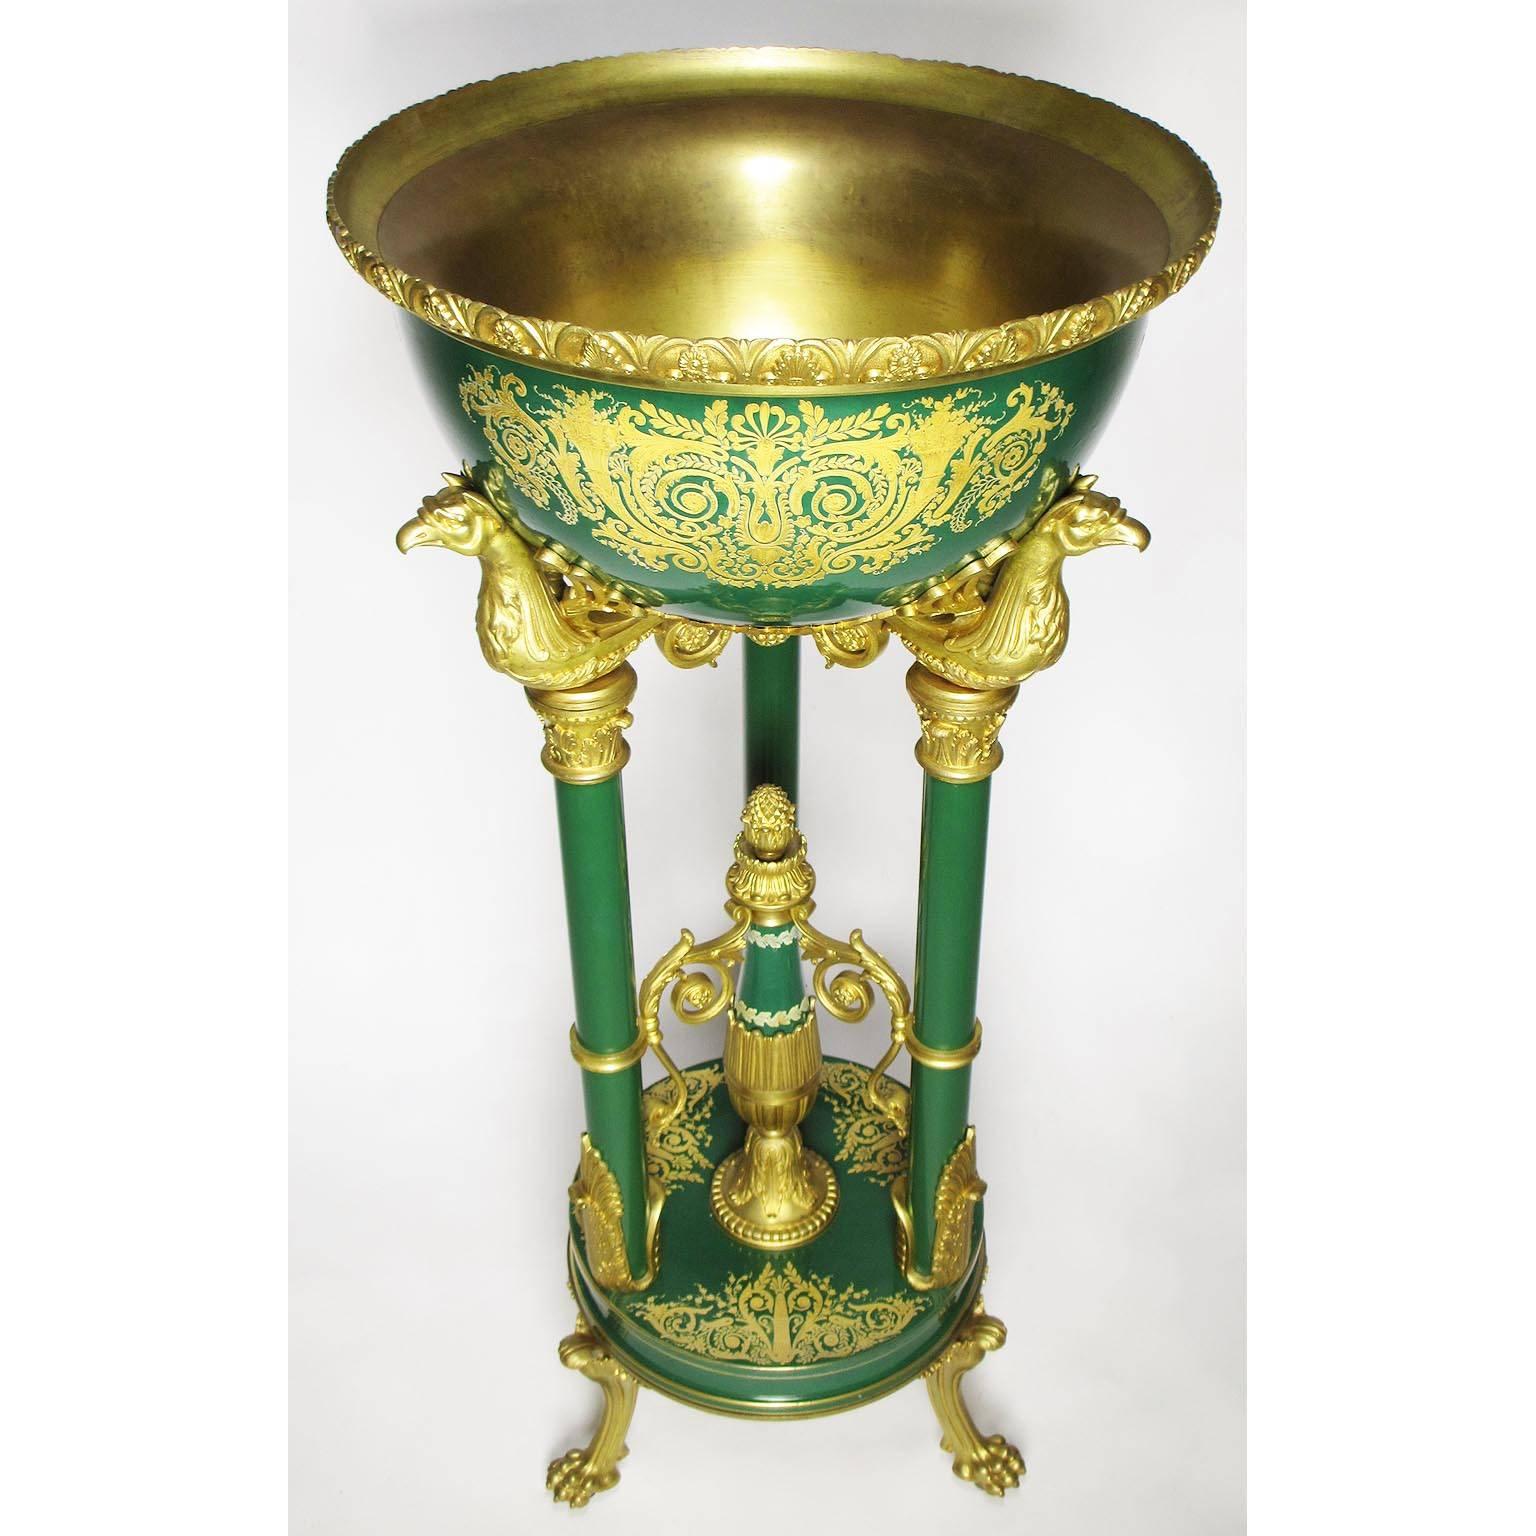 A very fine and rare French 19th century Napoleon III gilt bronze-mounted porcelain and enamel standing jardinière (planter) in the Egyptian Revival Style, probably by Sèvres, the circular green porcelain basin with relief gold decorations and